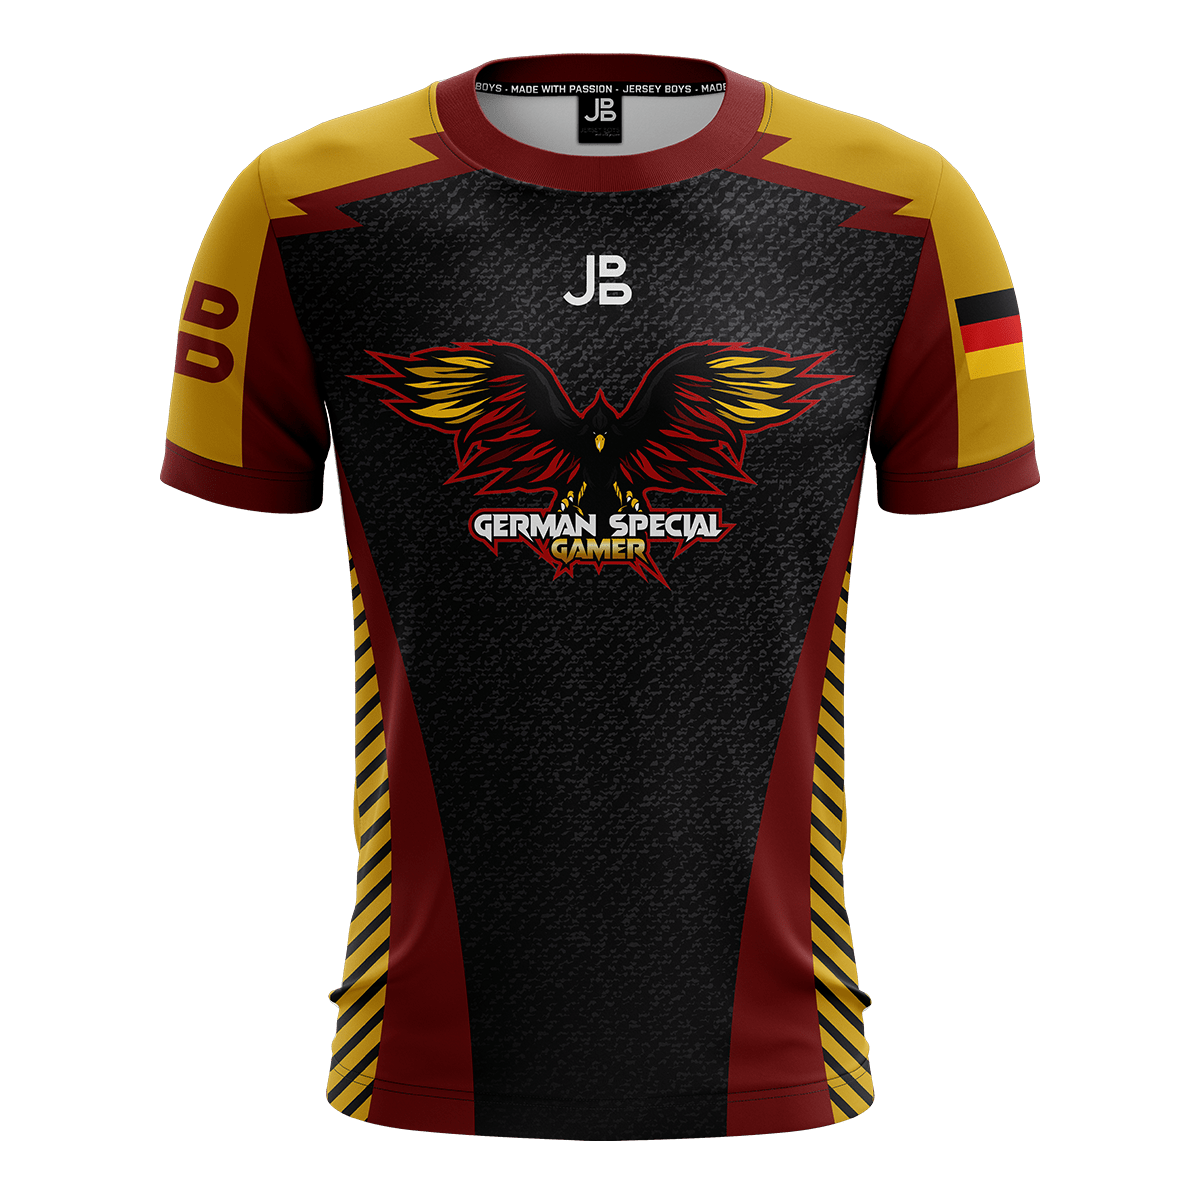 GERMAN SPECIAL GAMERS - Jersey 2020